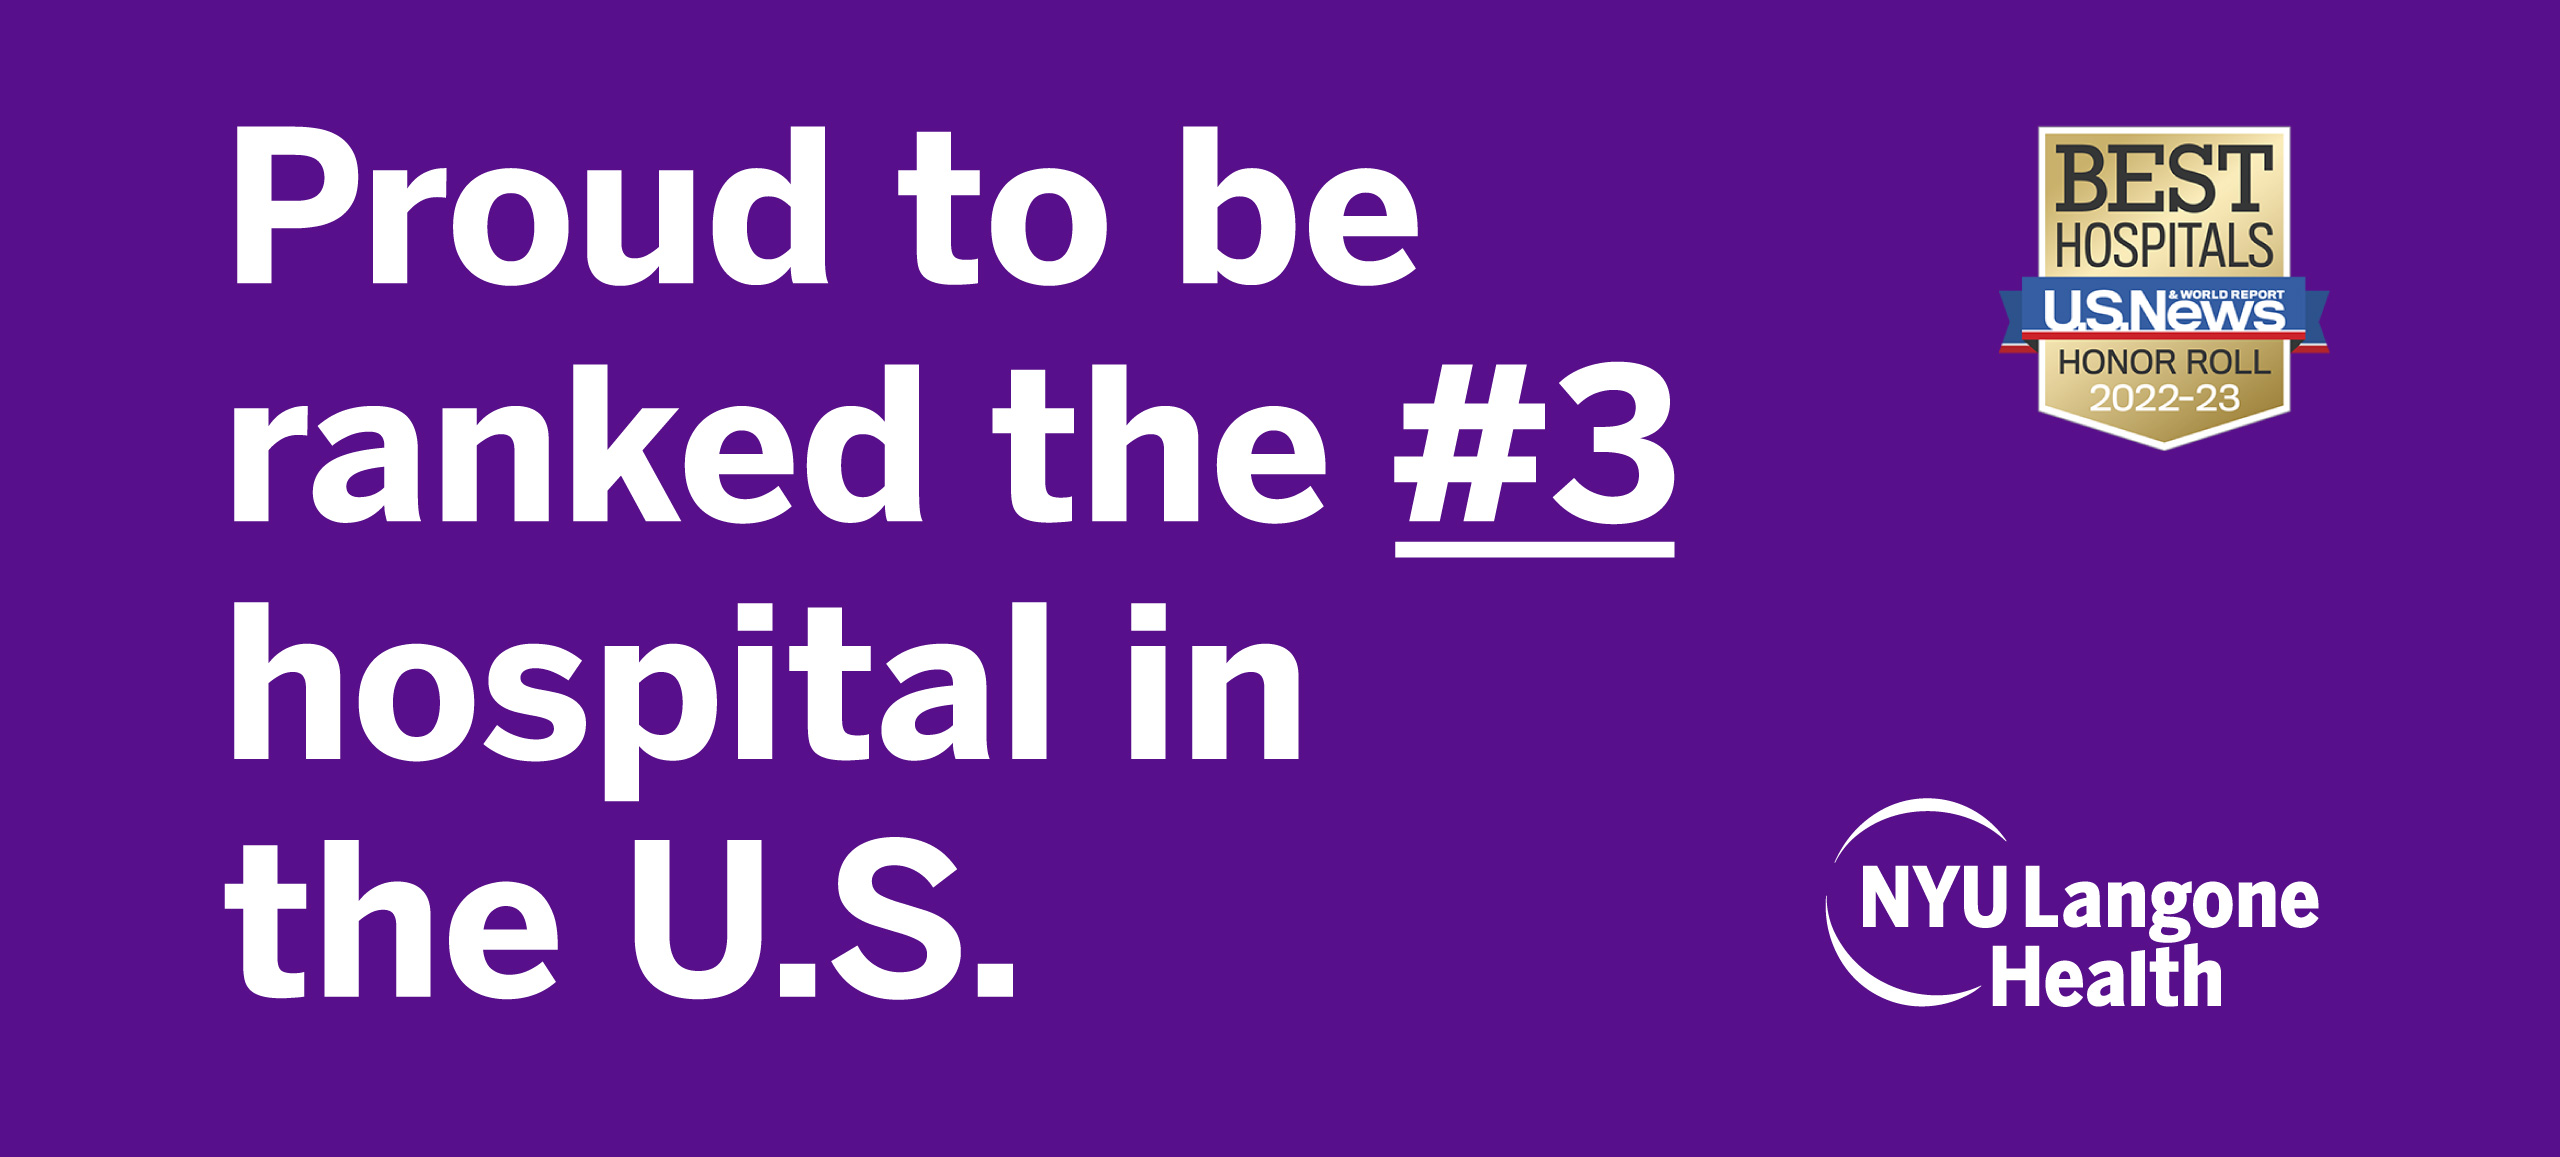 NYULH is proud to be ranked the #3 hospital in the U.S.